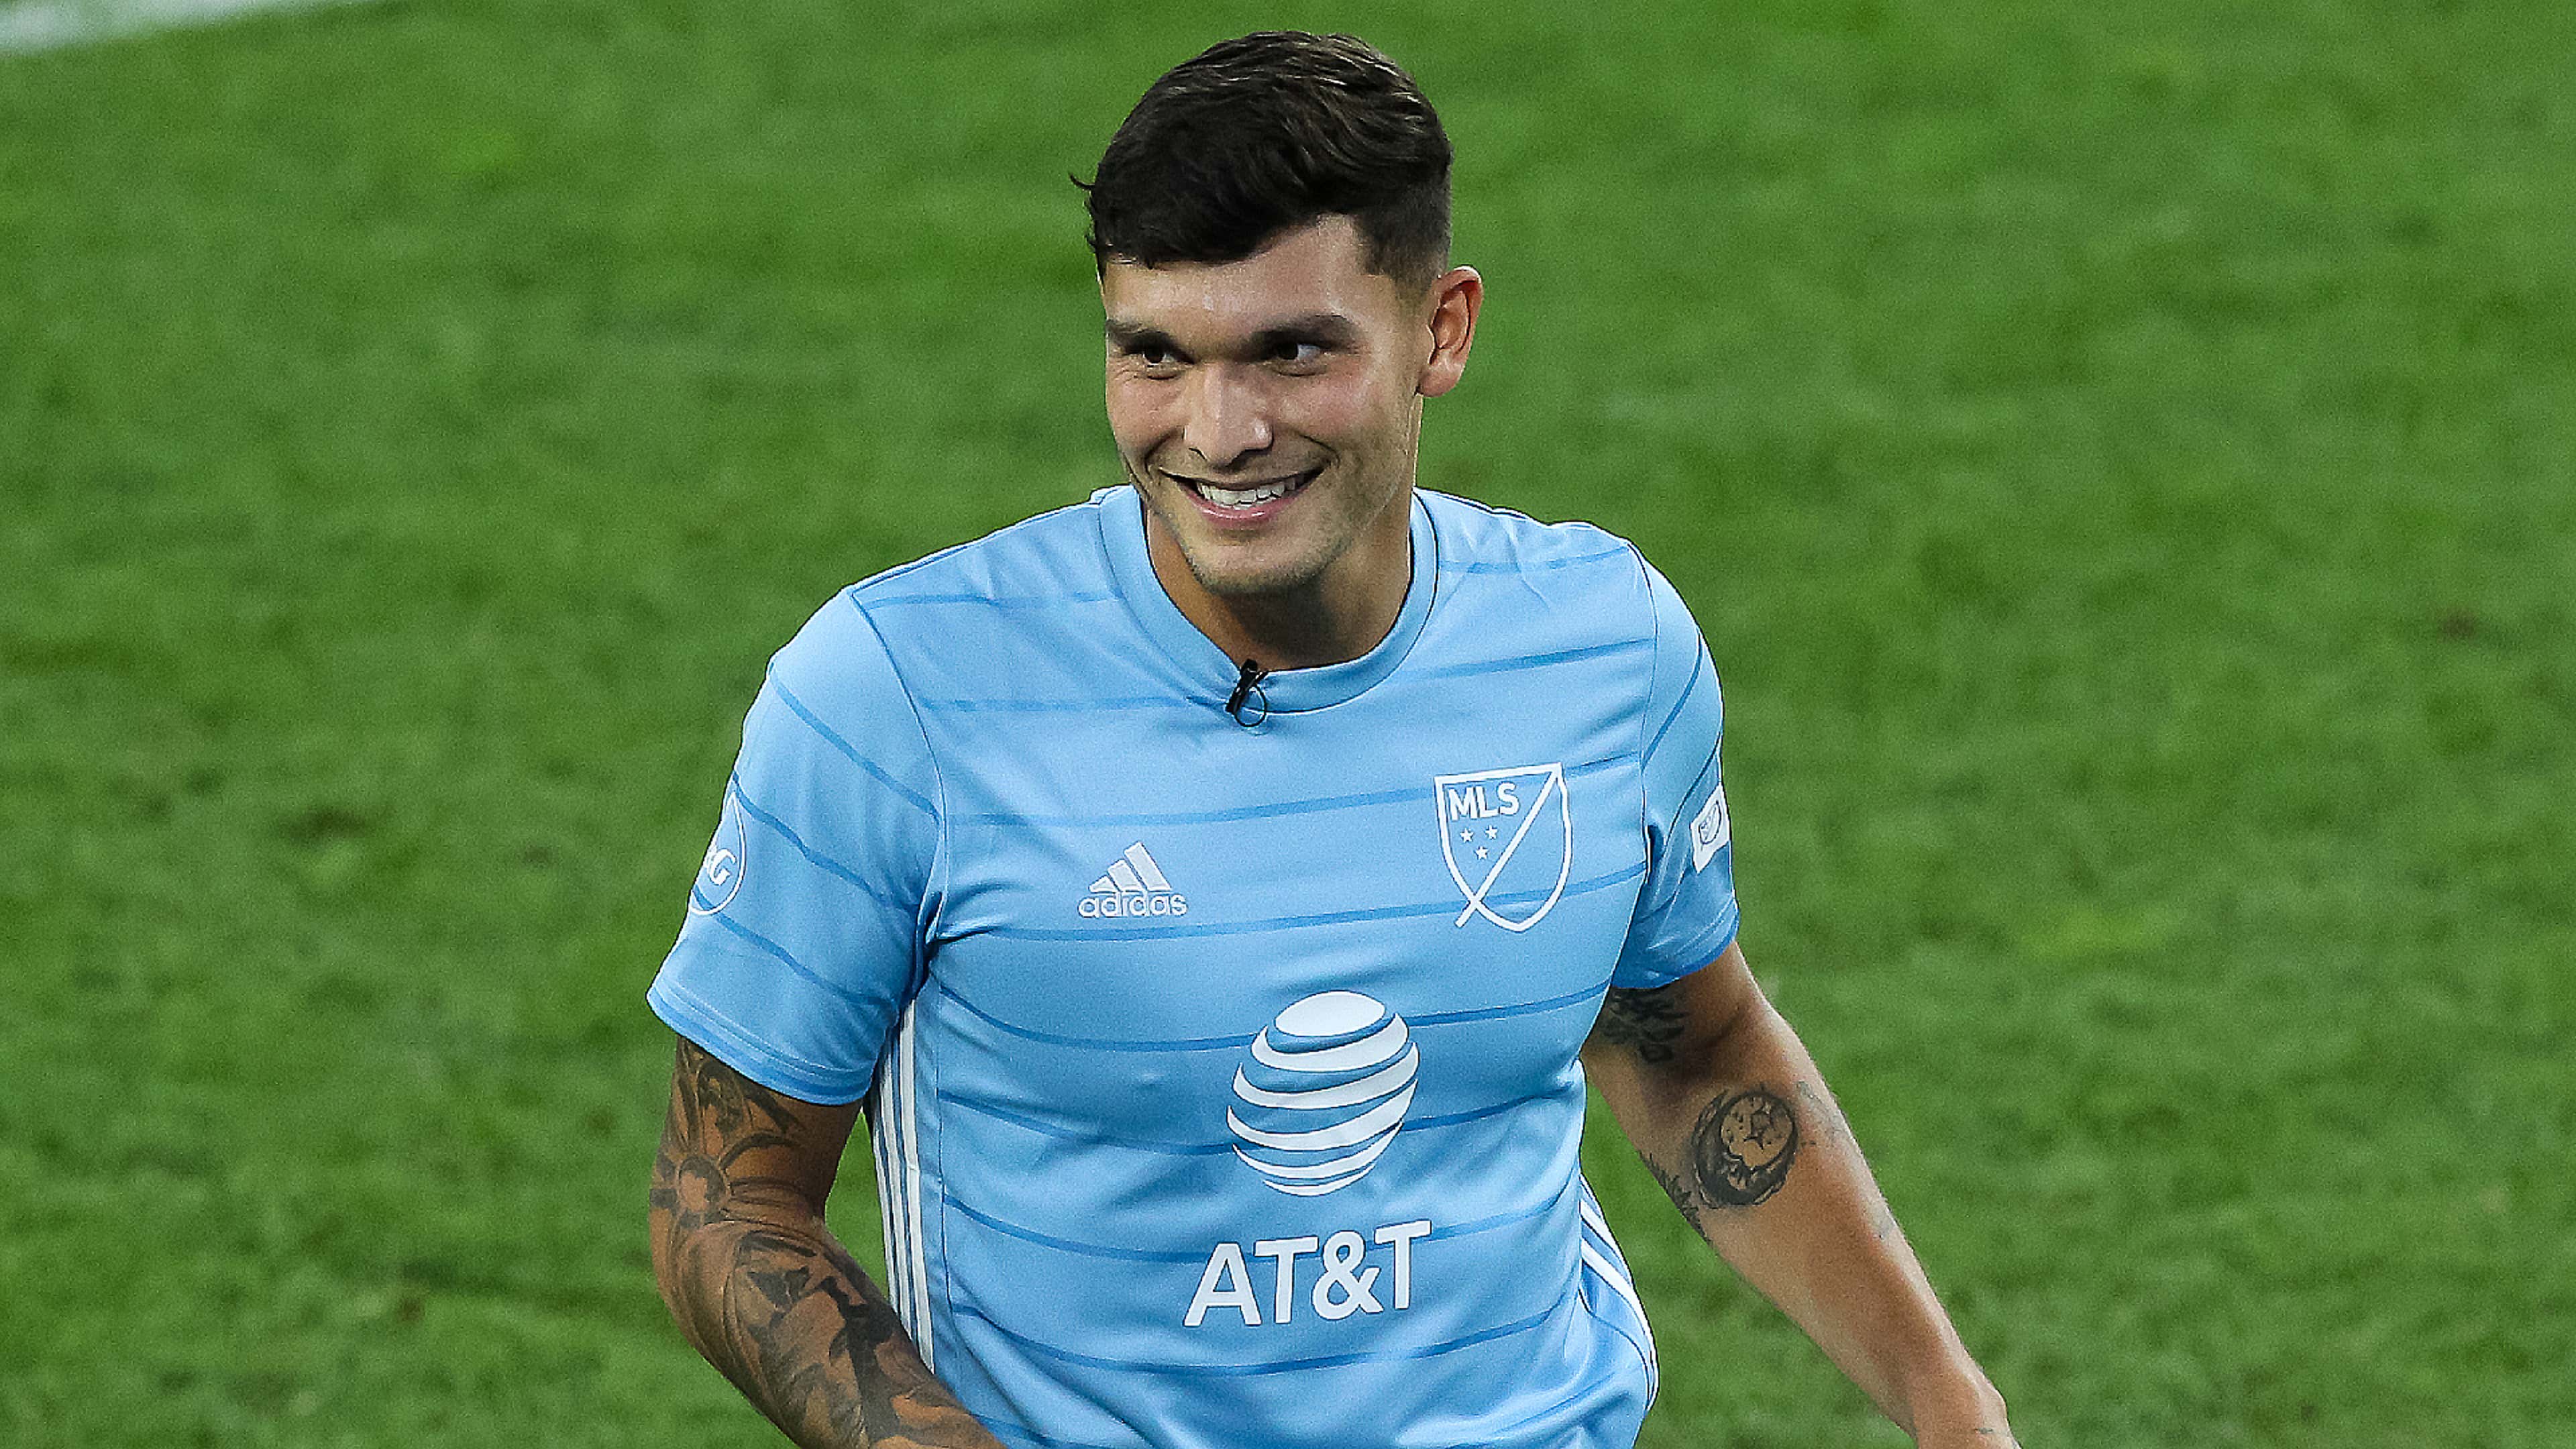 Hometown pride on display in MLS All-Star win over Mexico's Liga